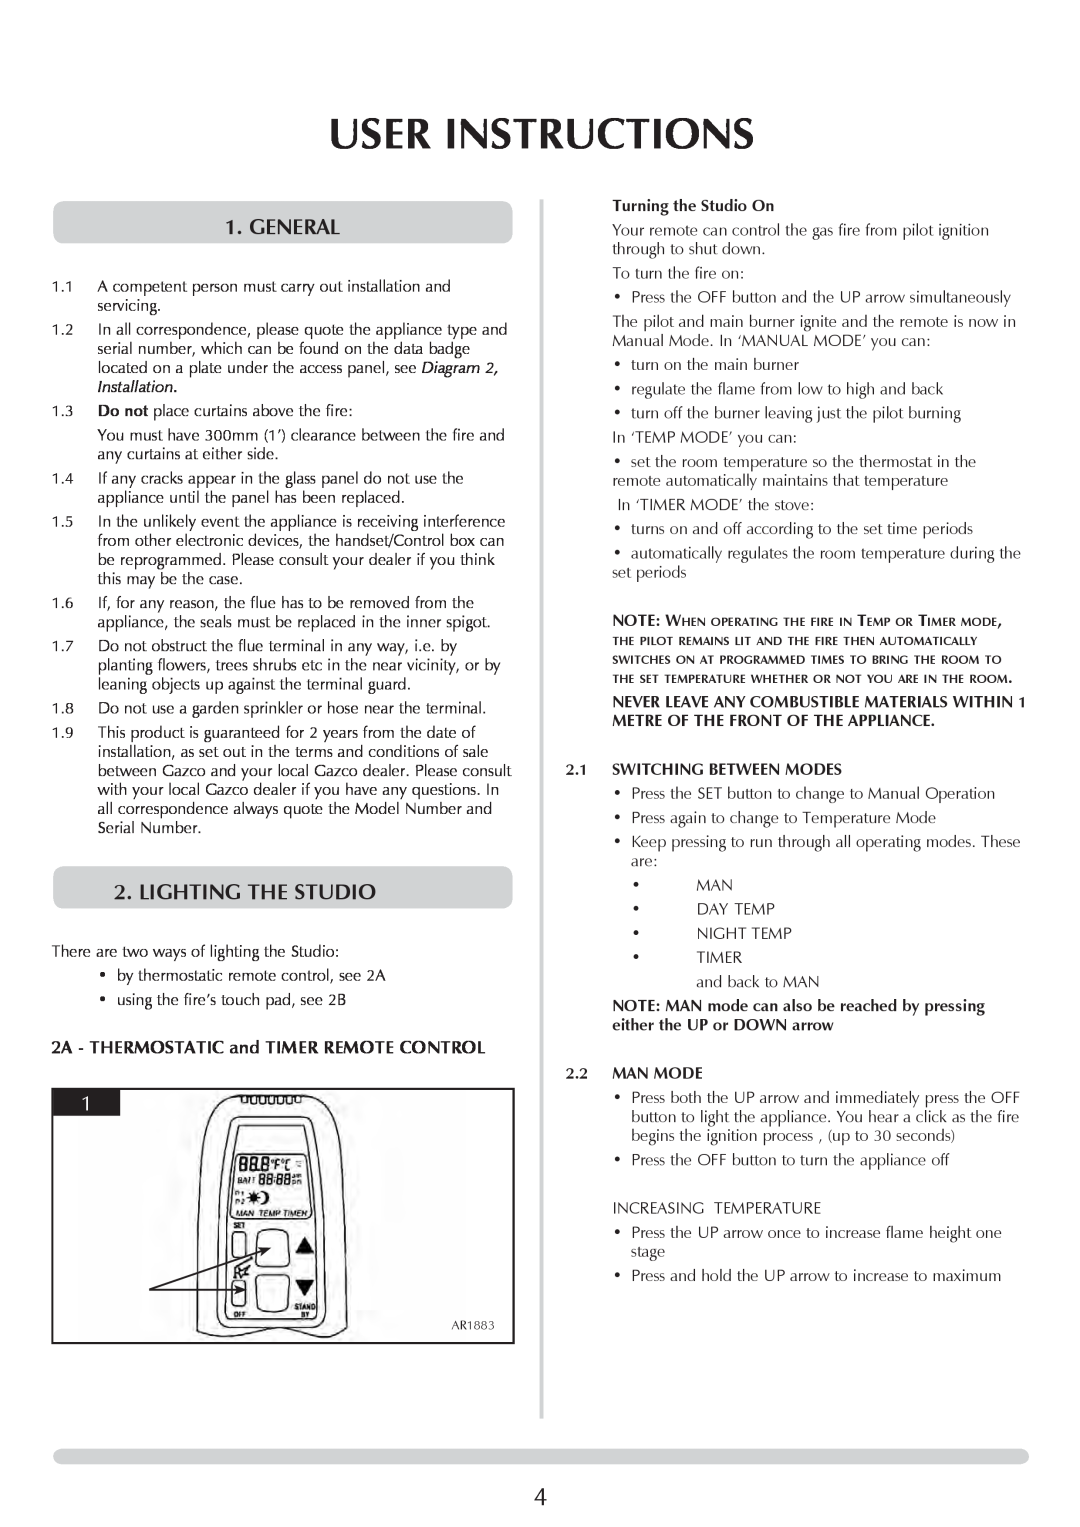 Stovax PR0919 User Instructions, general, lighting the STUDIO, Turning the Studio On, Switching Between Modes, 2.2MAN MODE 